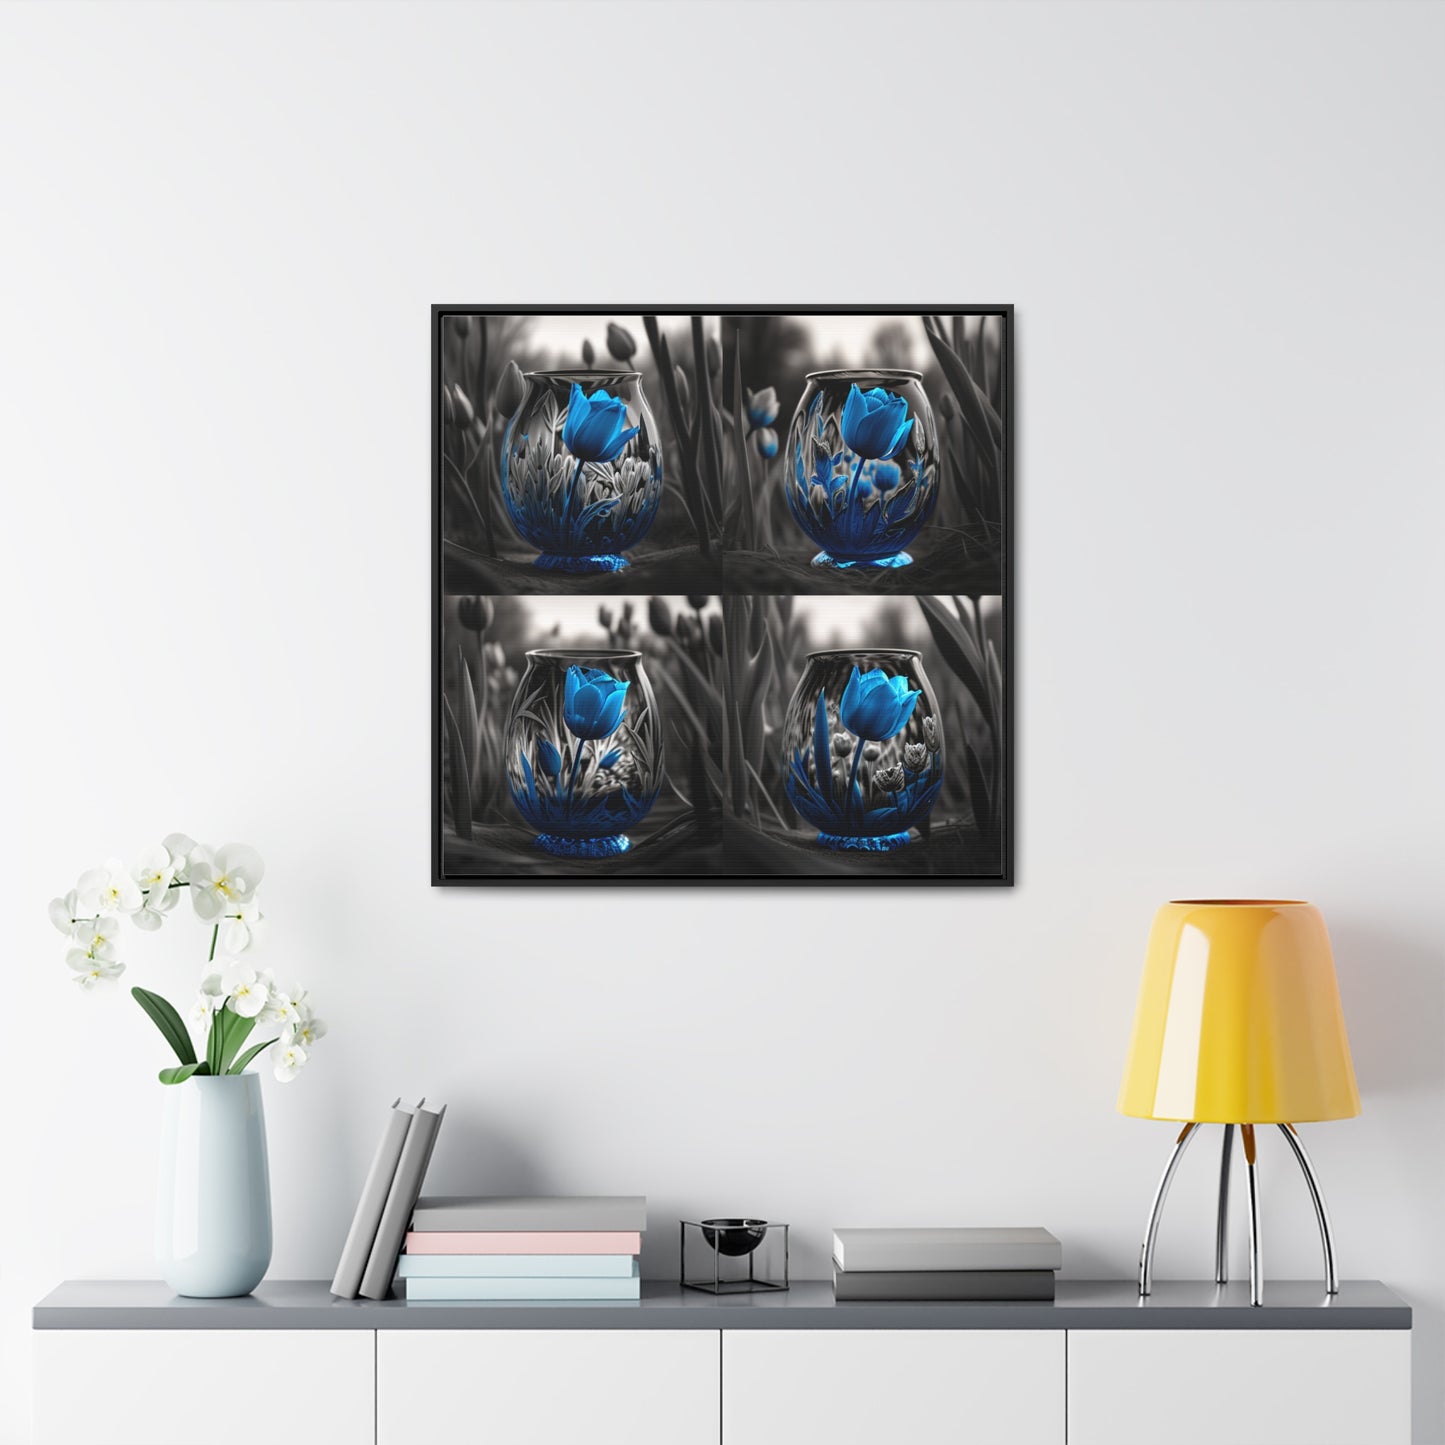 Gallery Canvas Wraps, Square Frame Tulip Blue 5